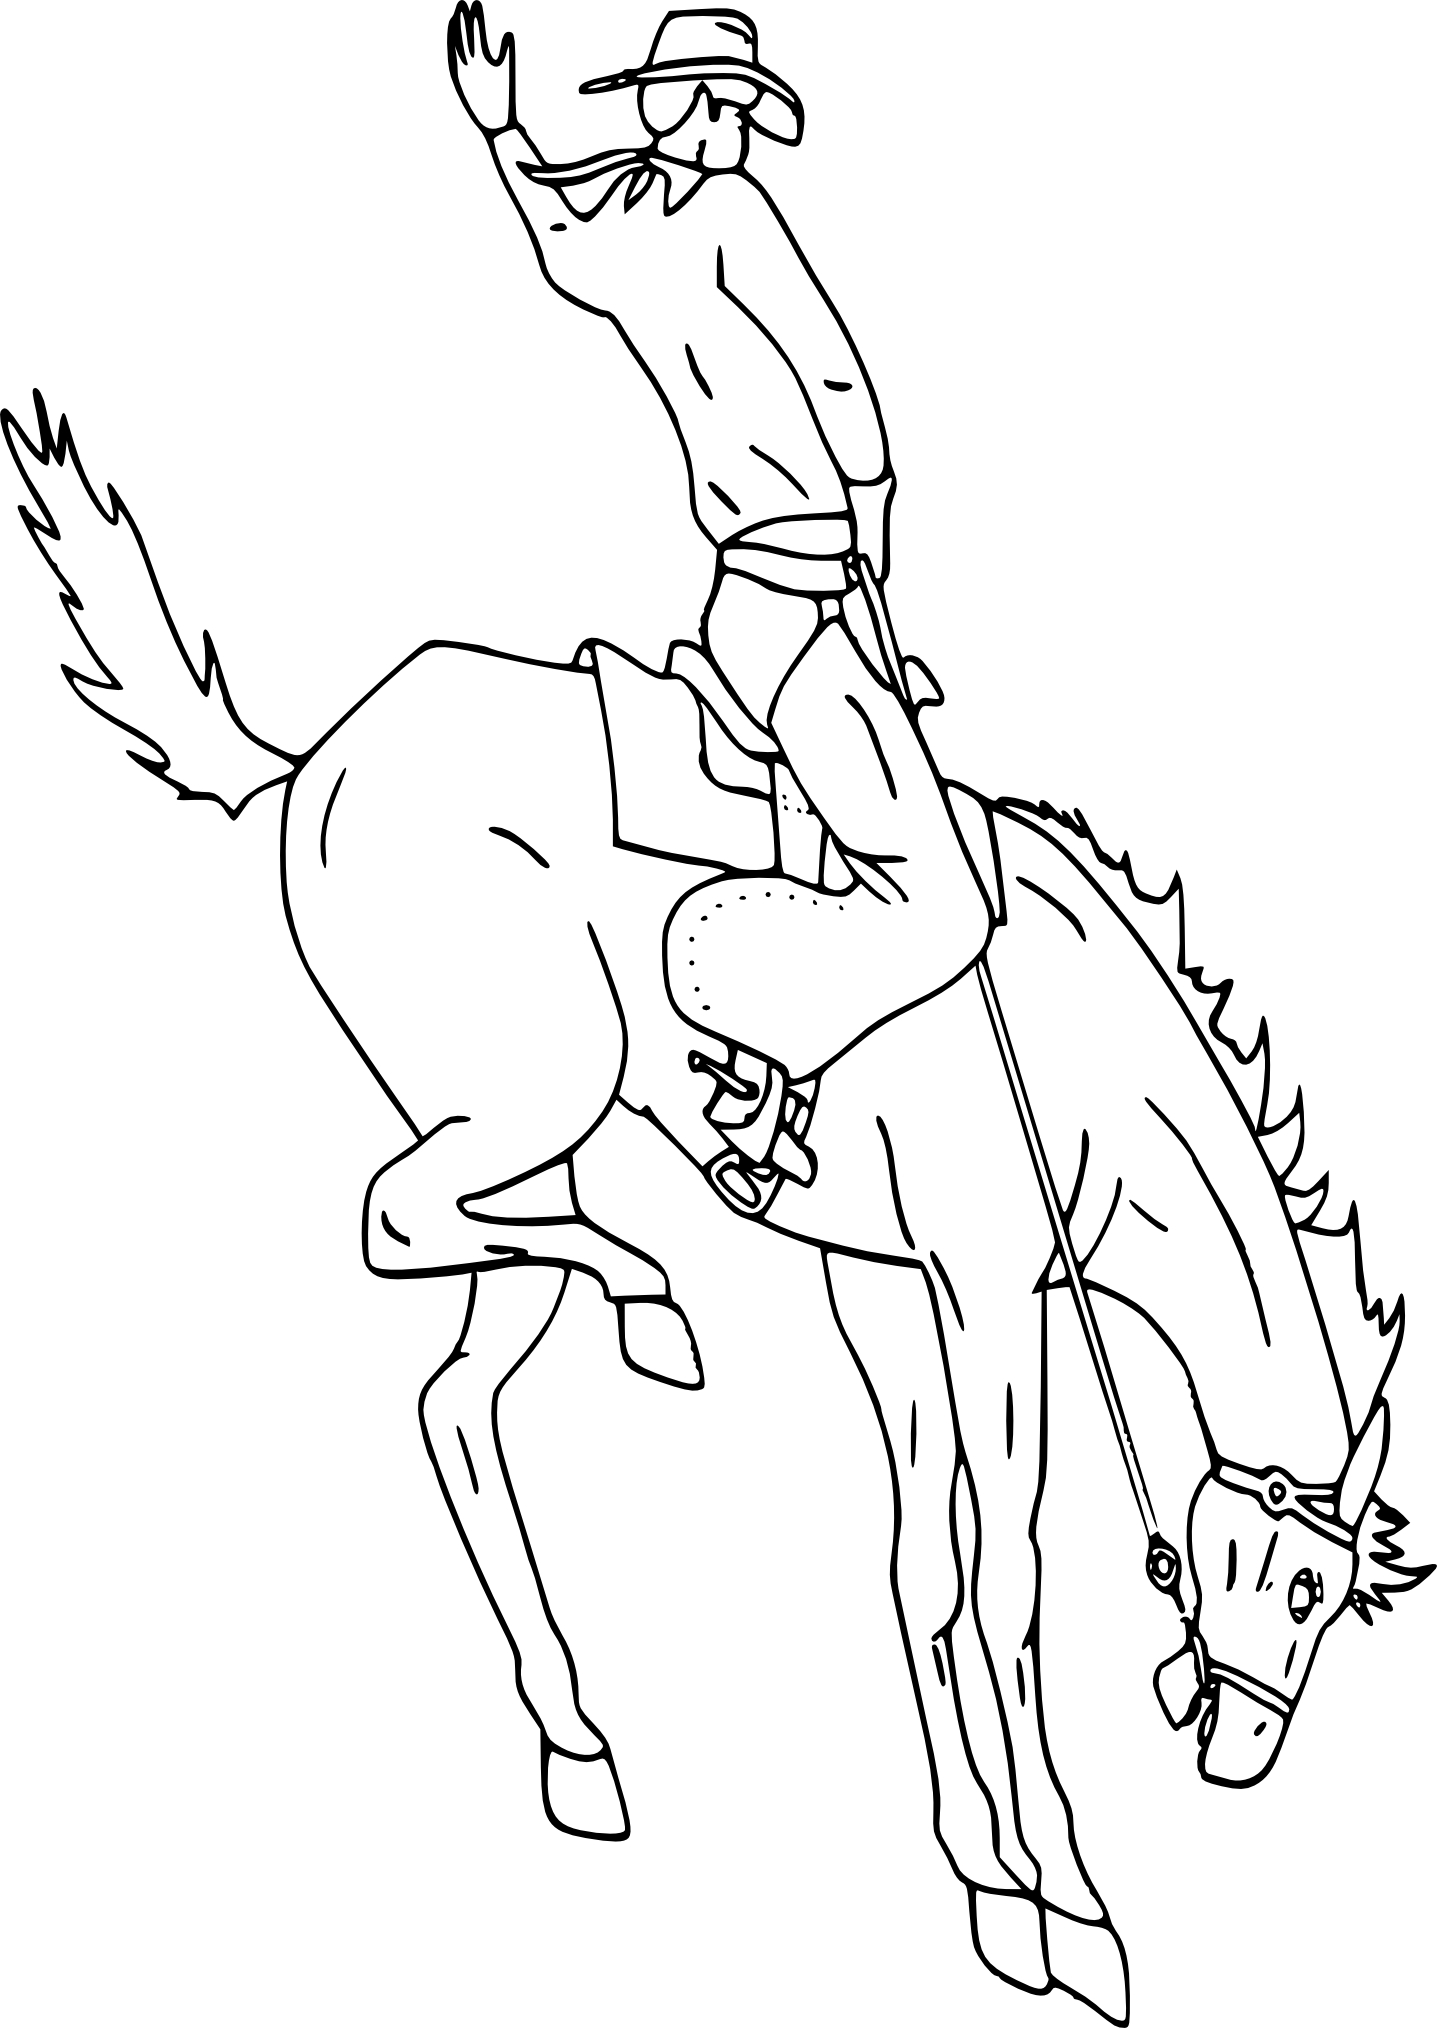 Rodeo coloring page